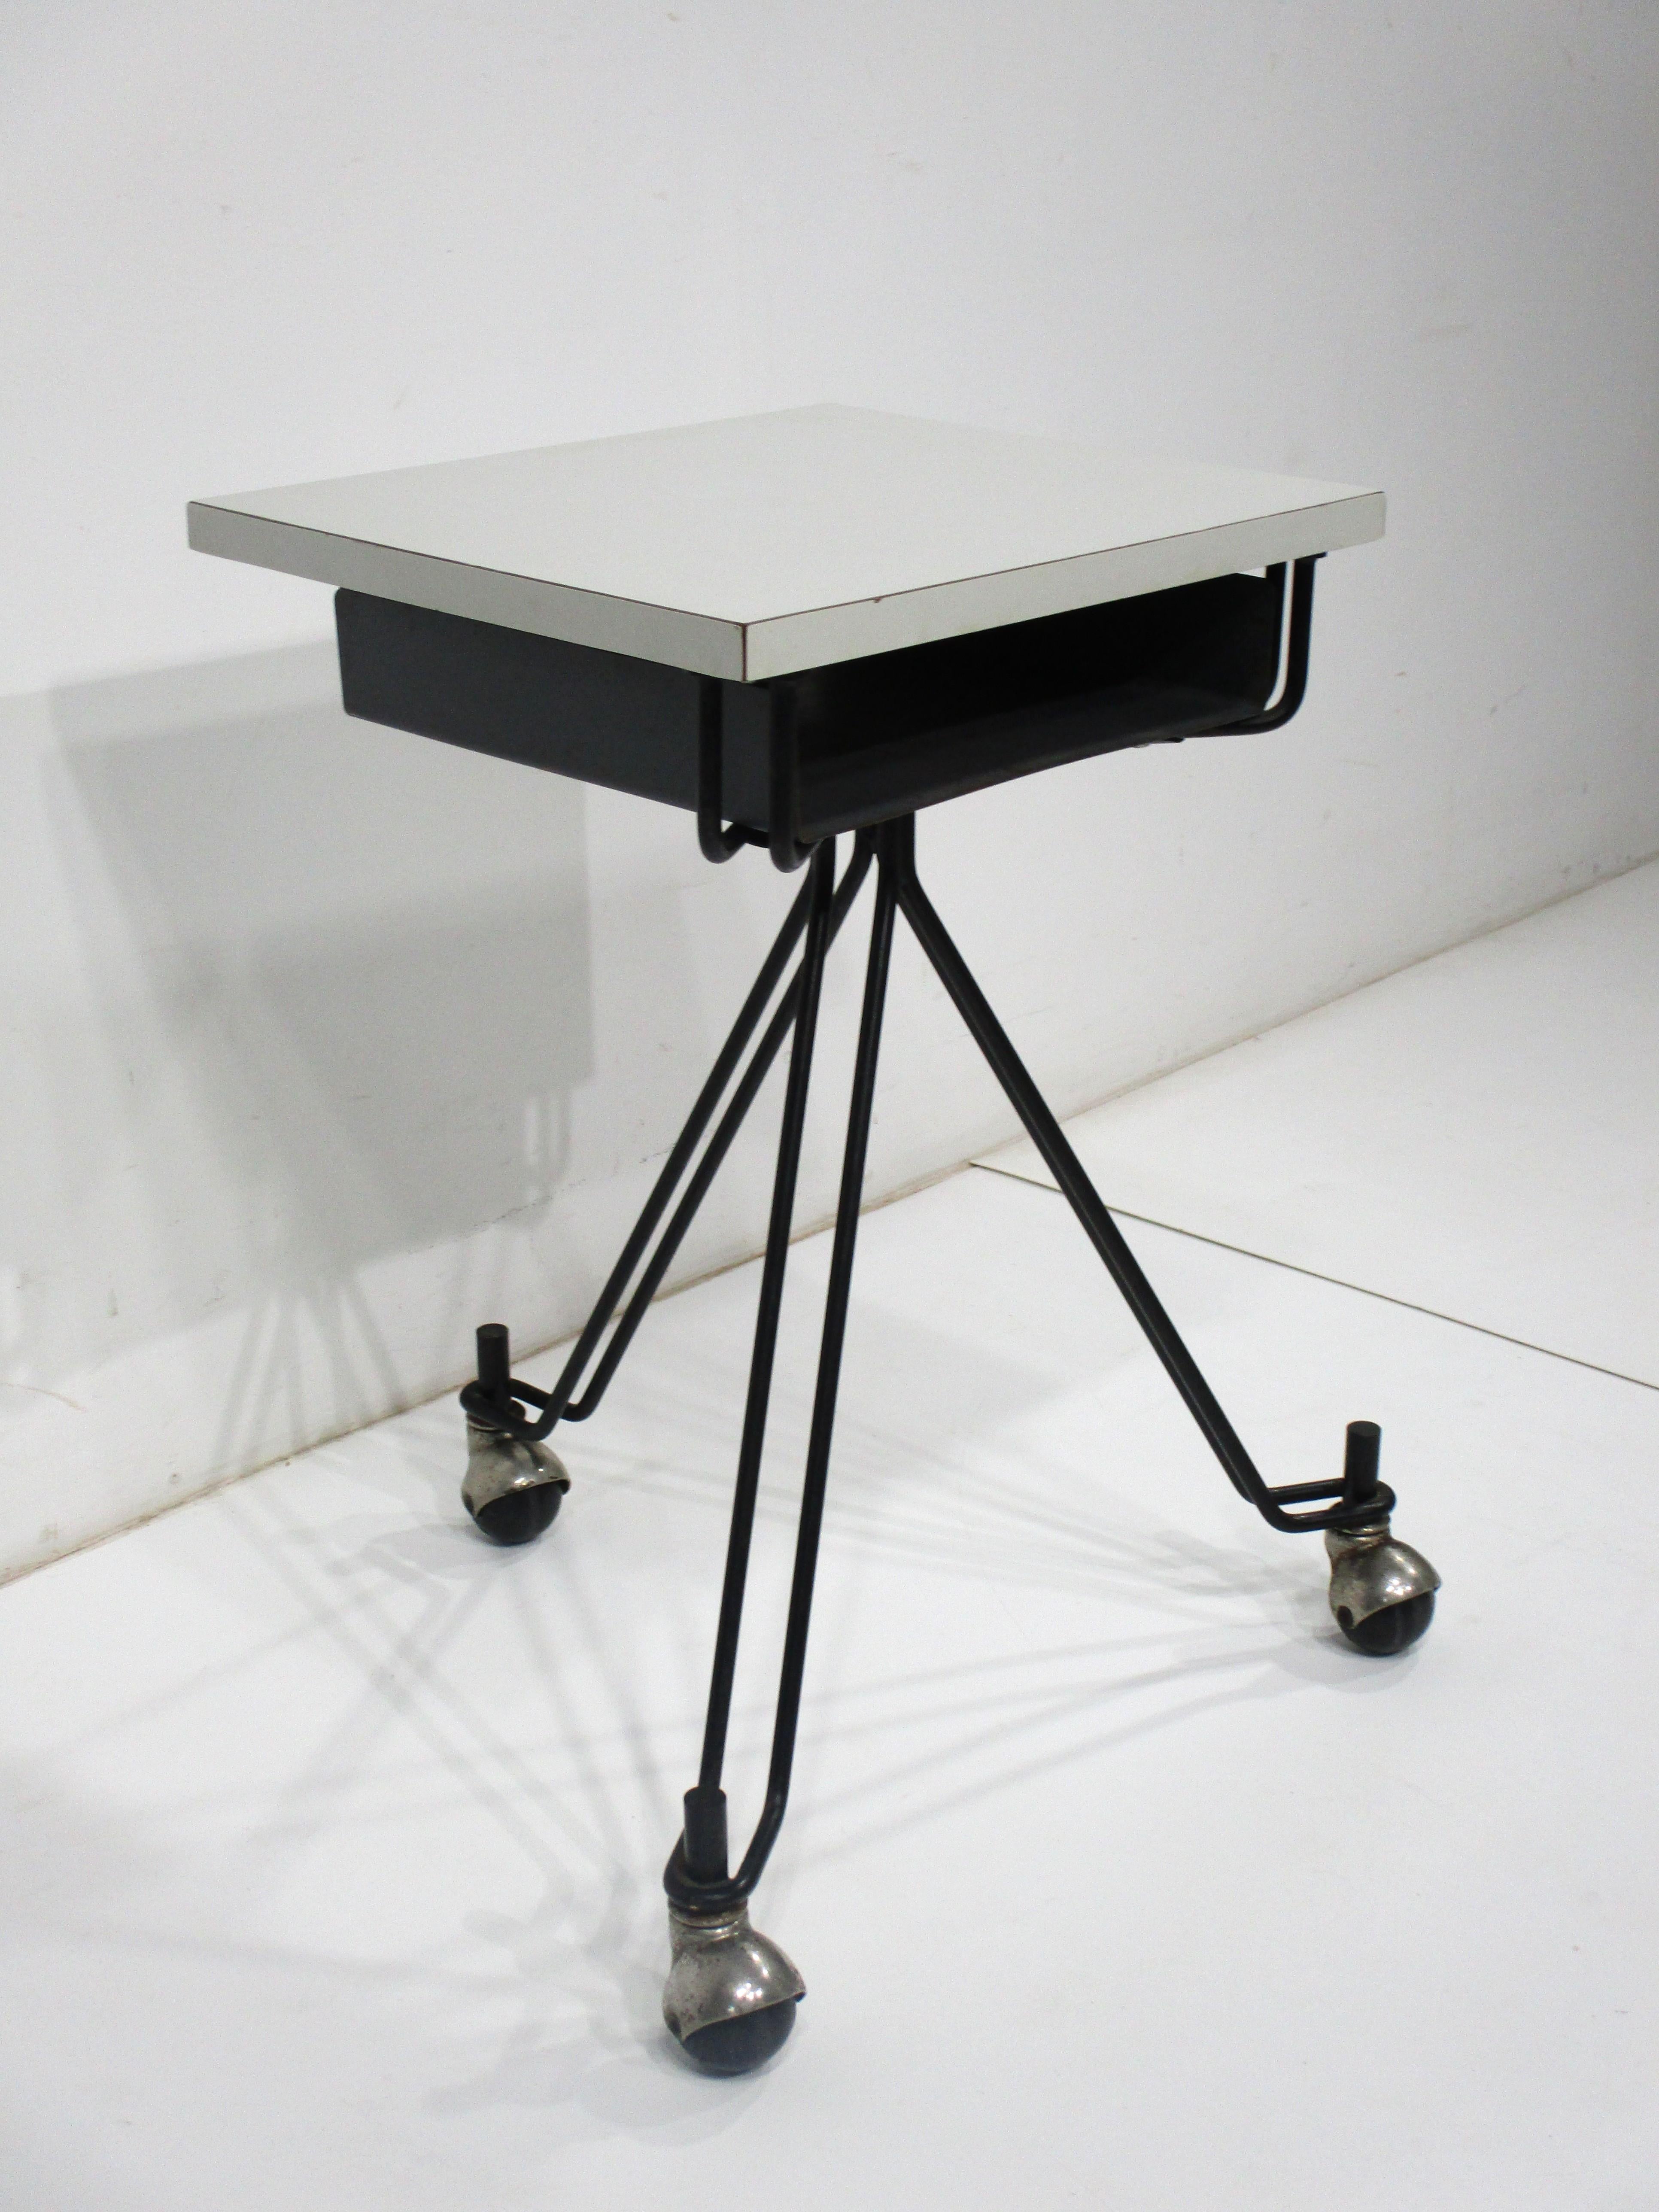 A classic Mid Century industrial form , a rolling small scale telephone , dictating machine desk table . Manufactured by IBM for in office use when you needed a portable work surface , a great piece that can be used for a laptop , cell phone or